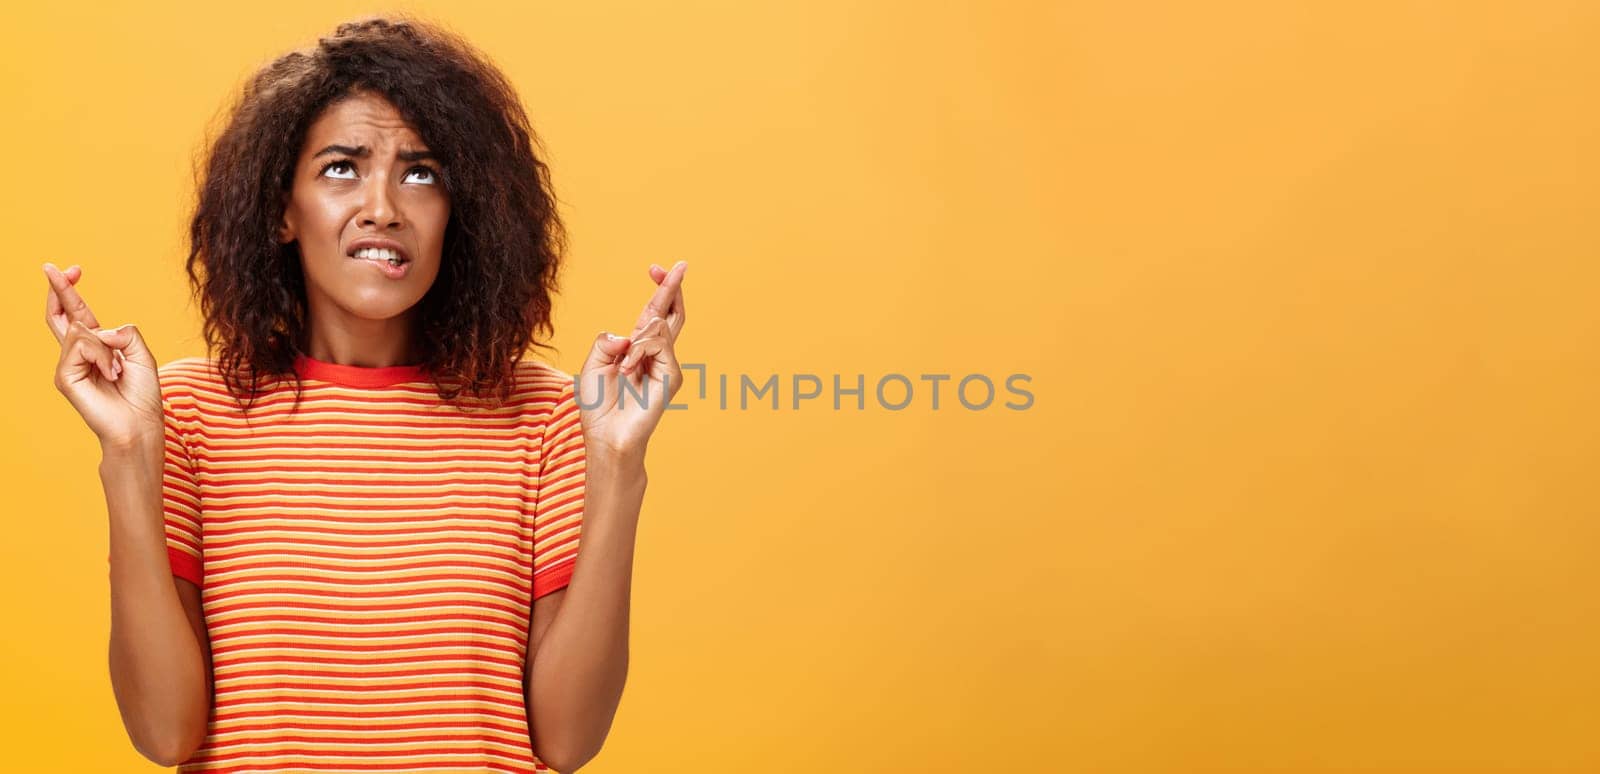 Waist-up shot of hopeful concerned and anxious charming dark-skinned woman with afro hairstyle in trendy striped t-shirt biting lip nervously looking up crossing fingers for good luck while praying. Lifestyle.